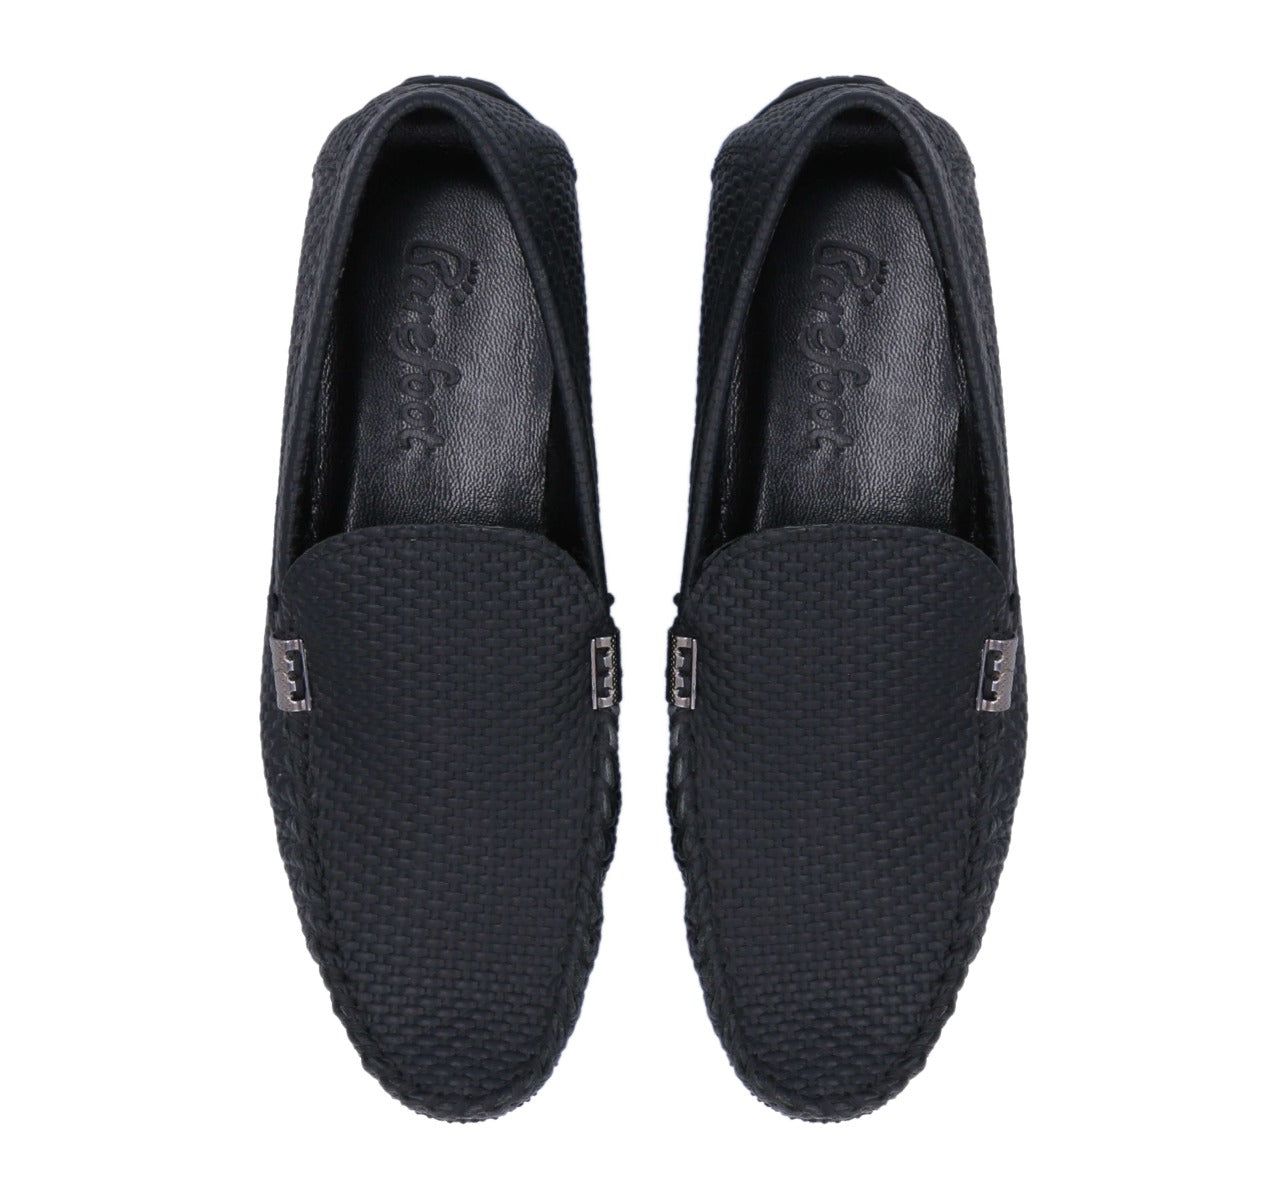 Barefoot Black Loafers Lace Up Suede For Men 6070-BL